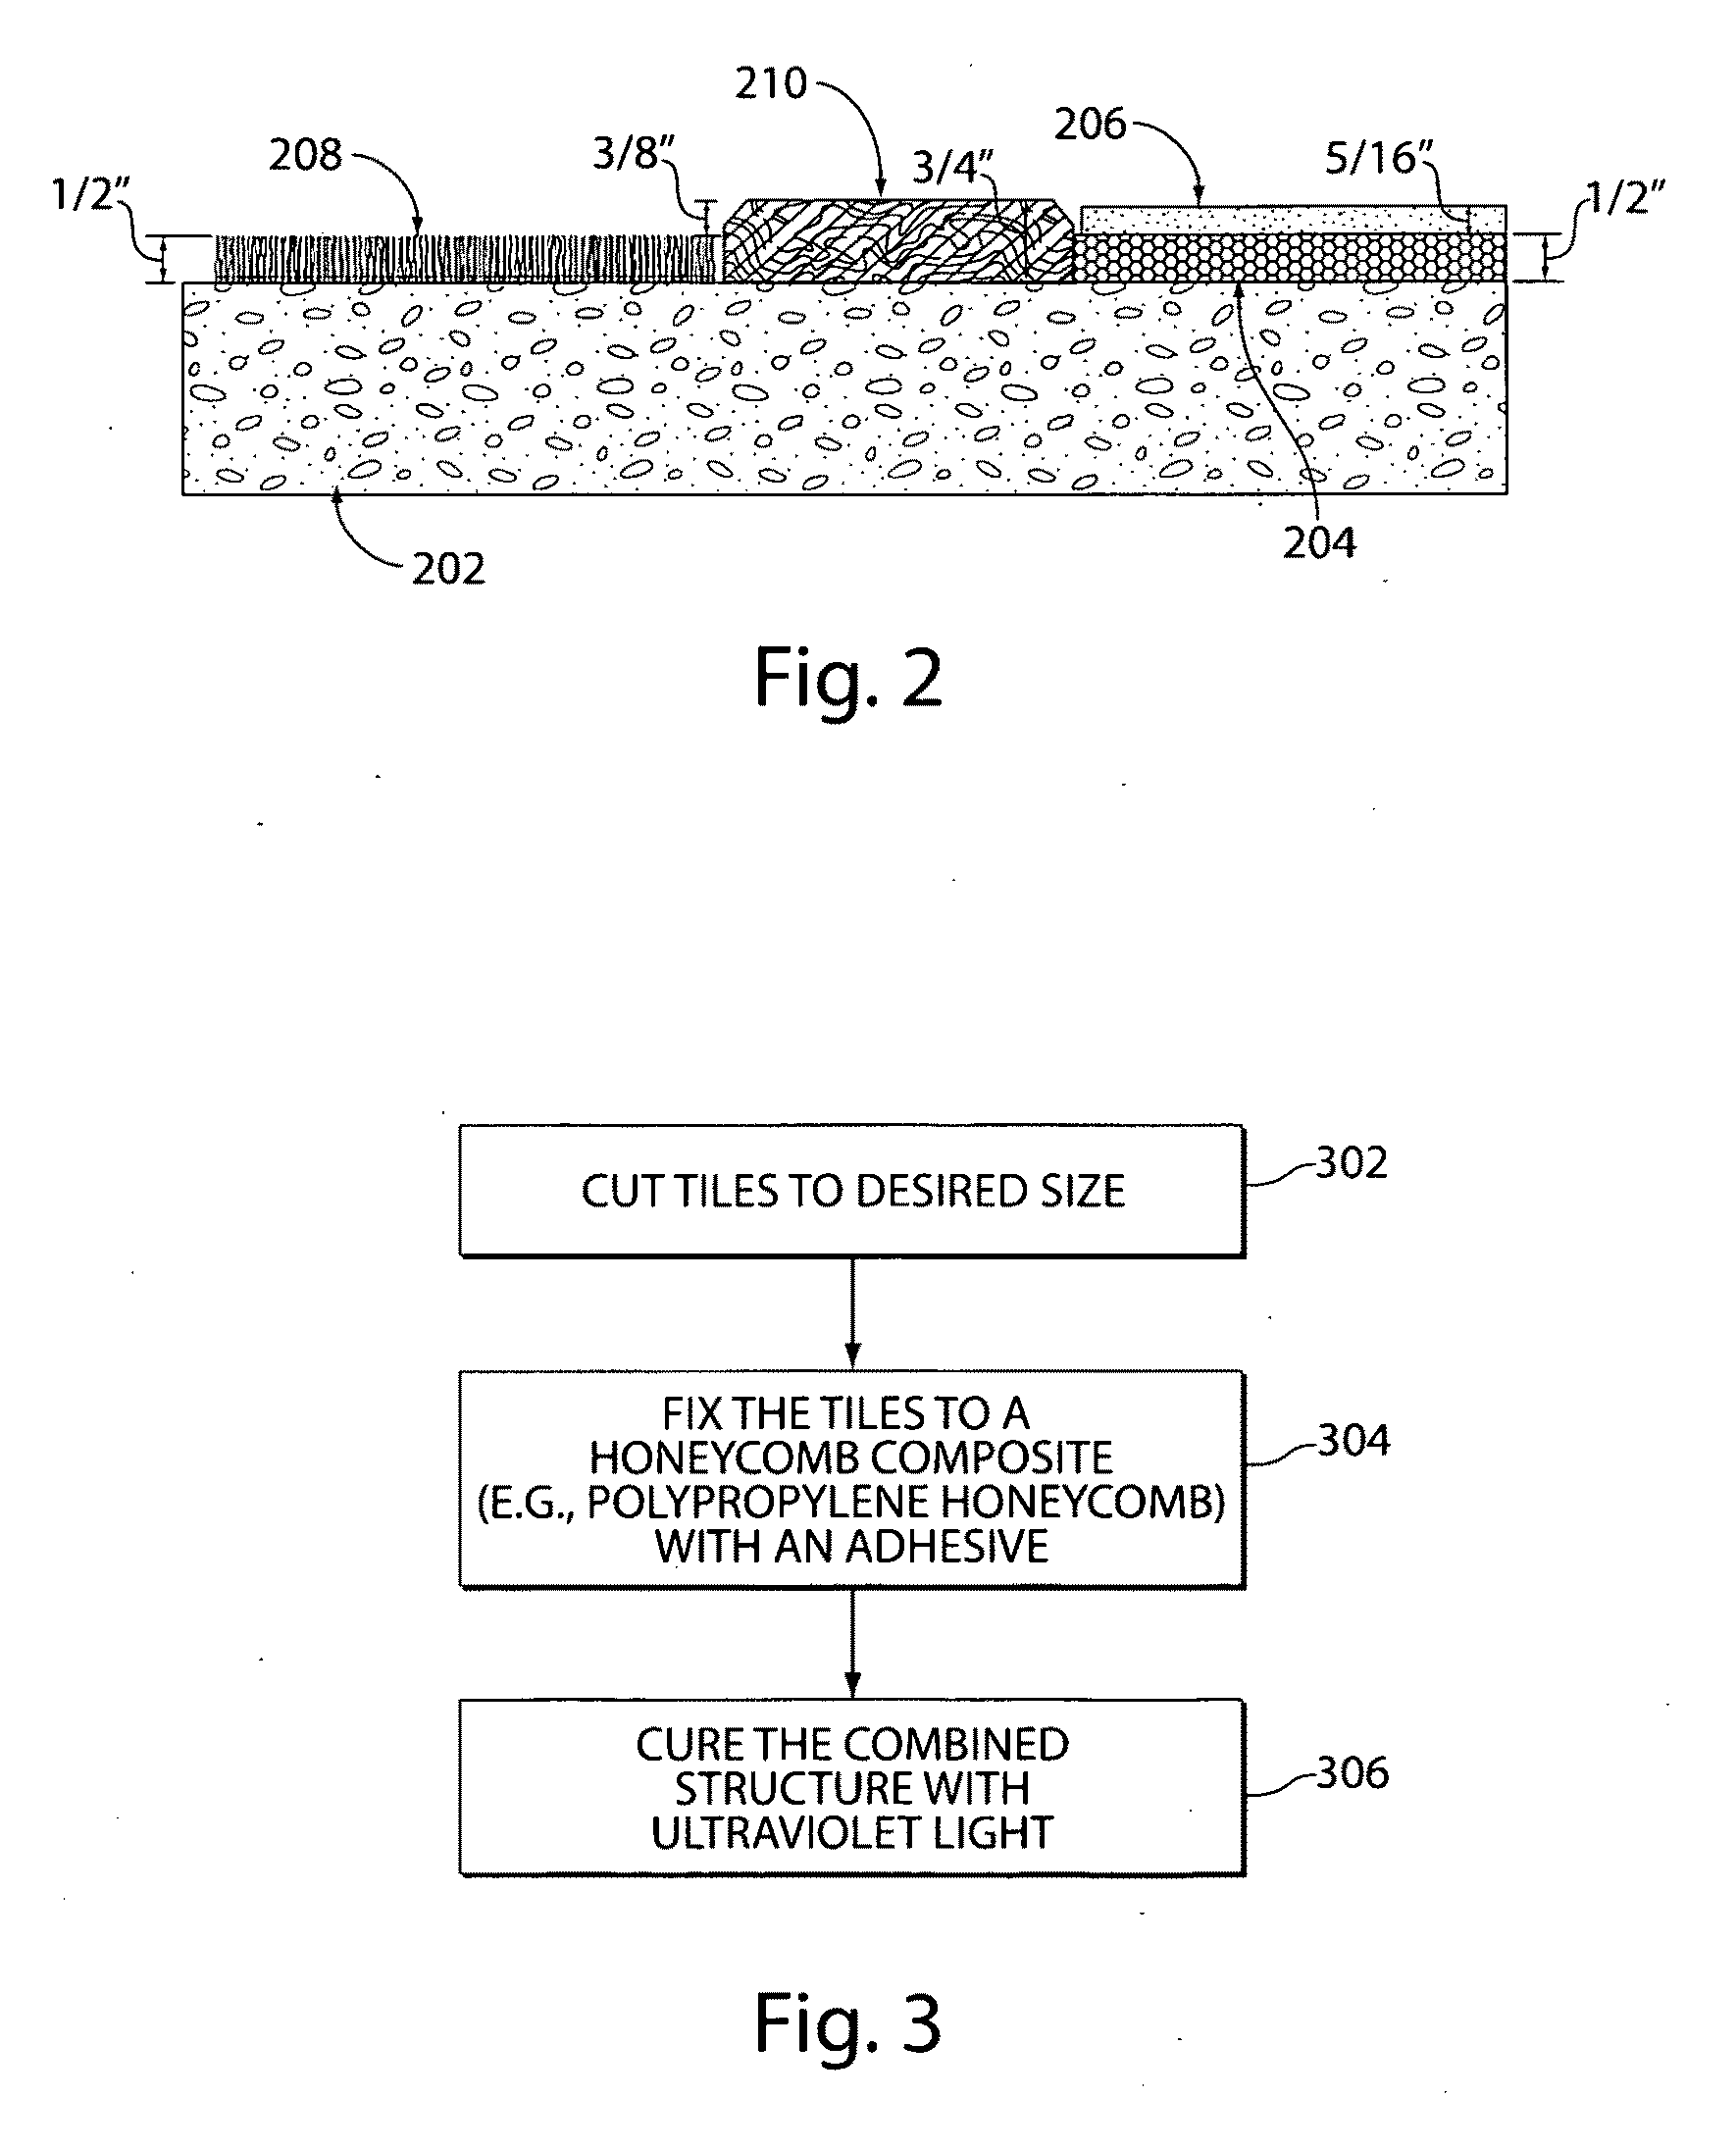 Prefabricated bathroom assembly and methods of its manufacture and installation